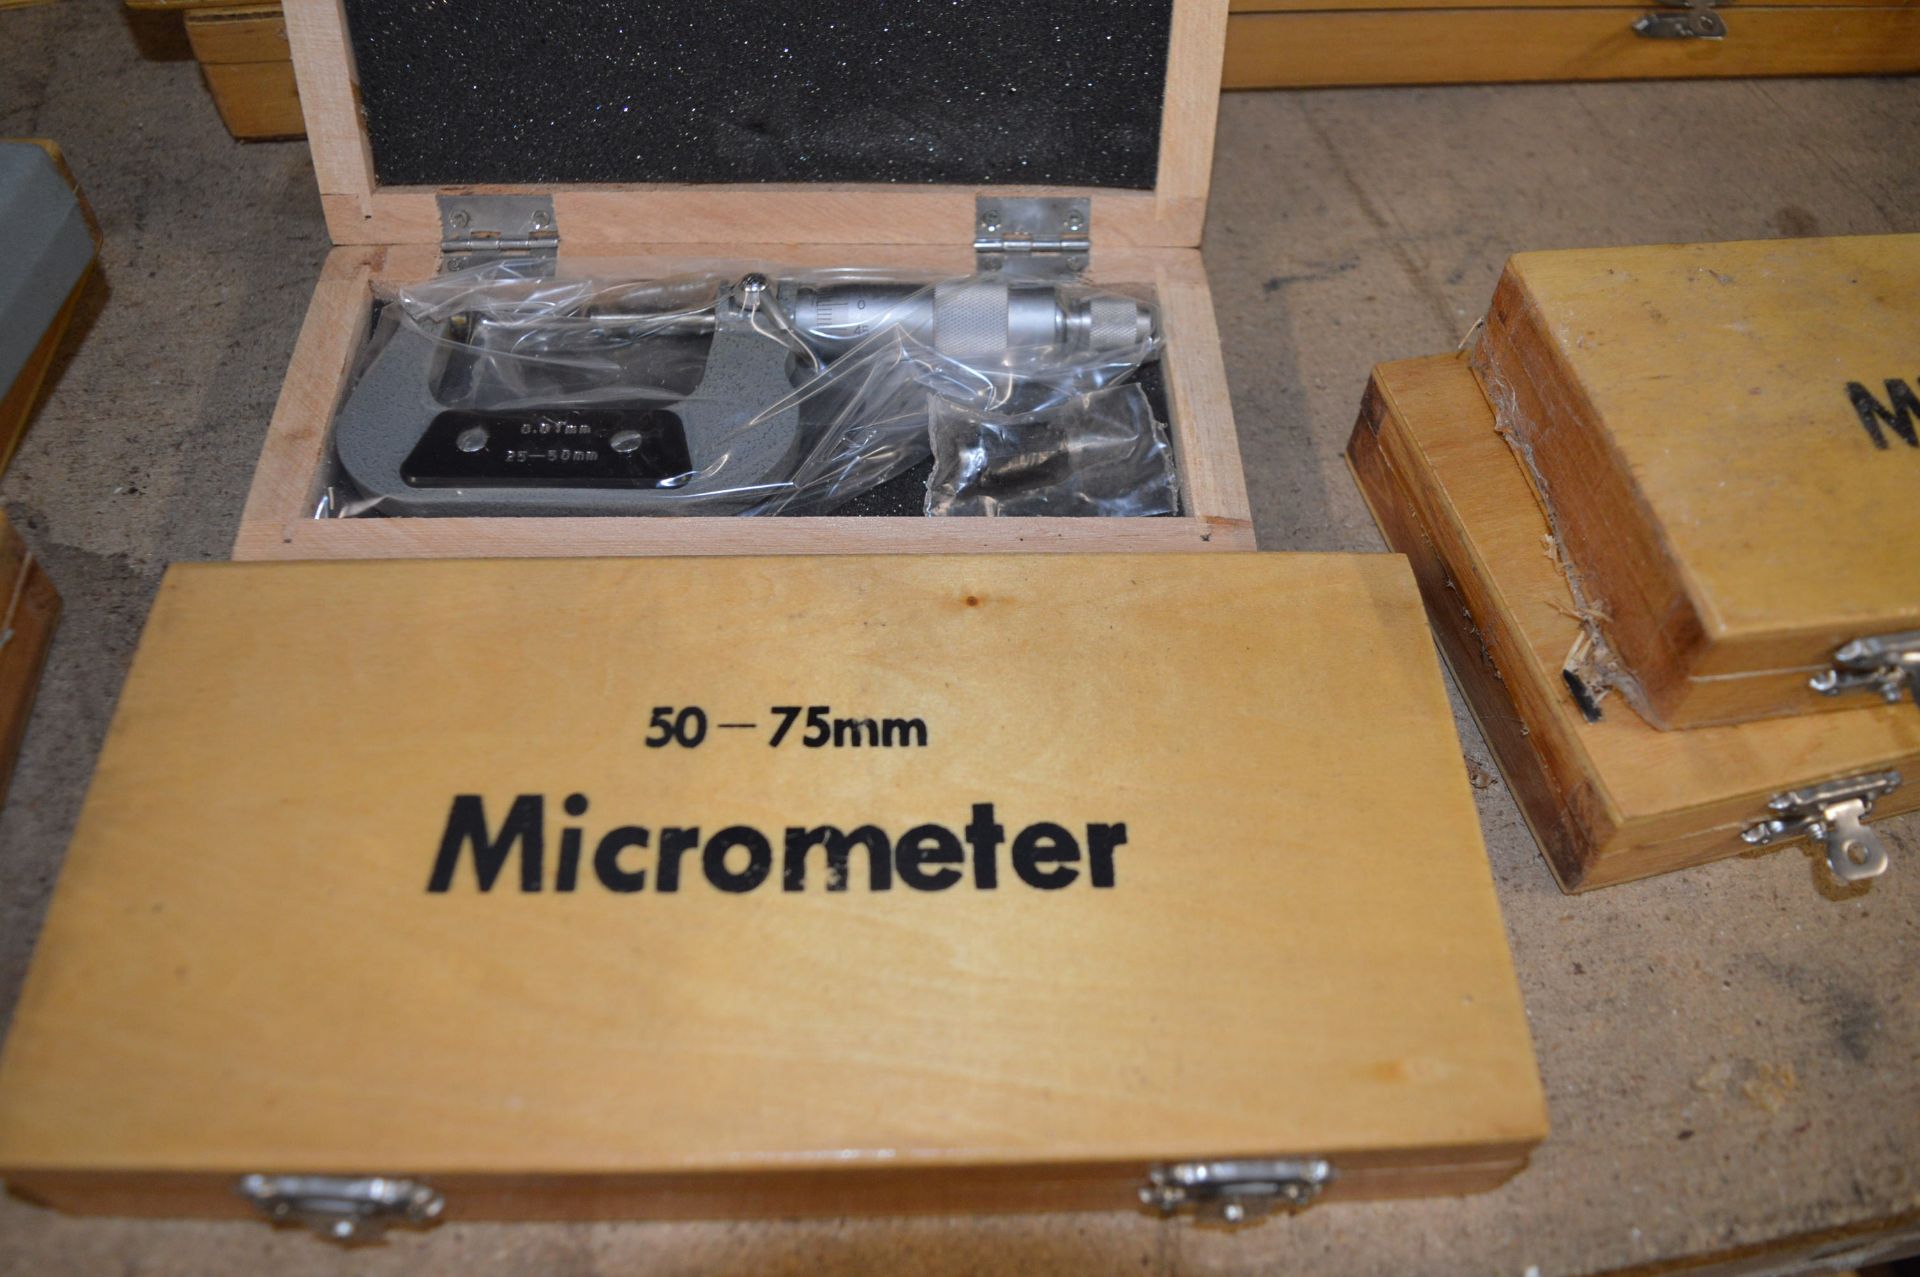 25-50mm and a 50-75mm Micrometer